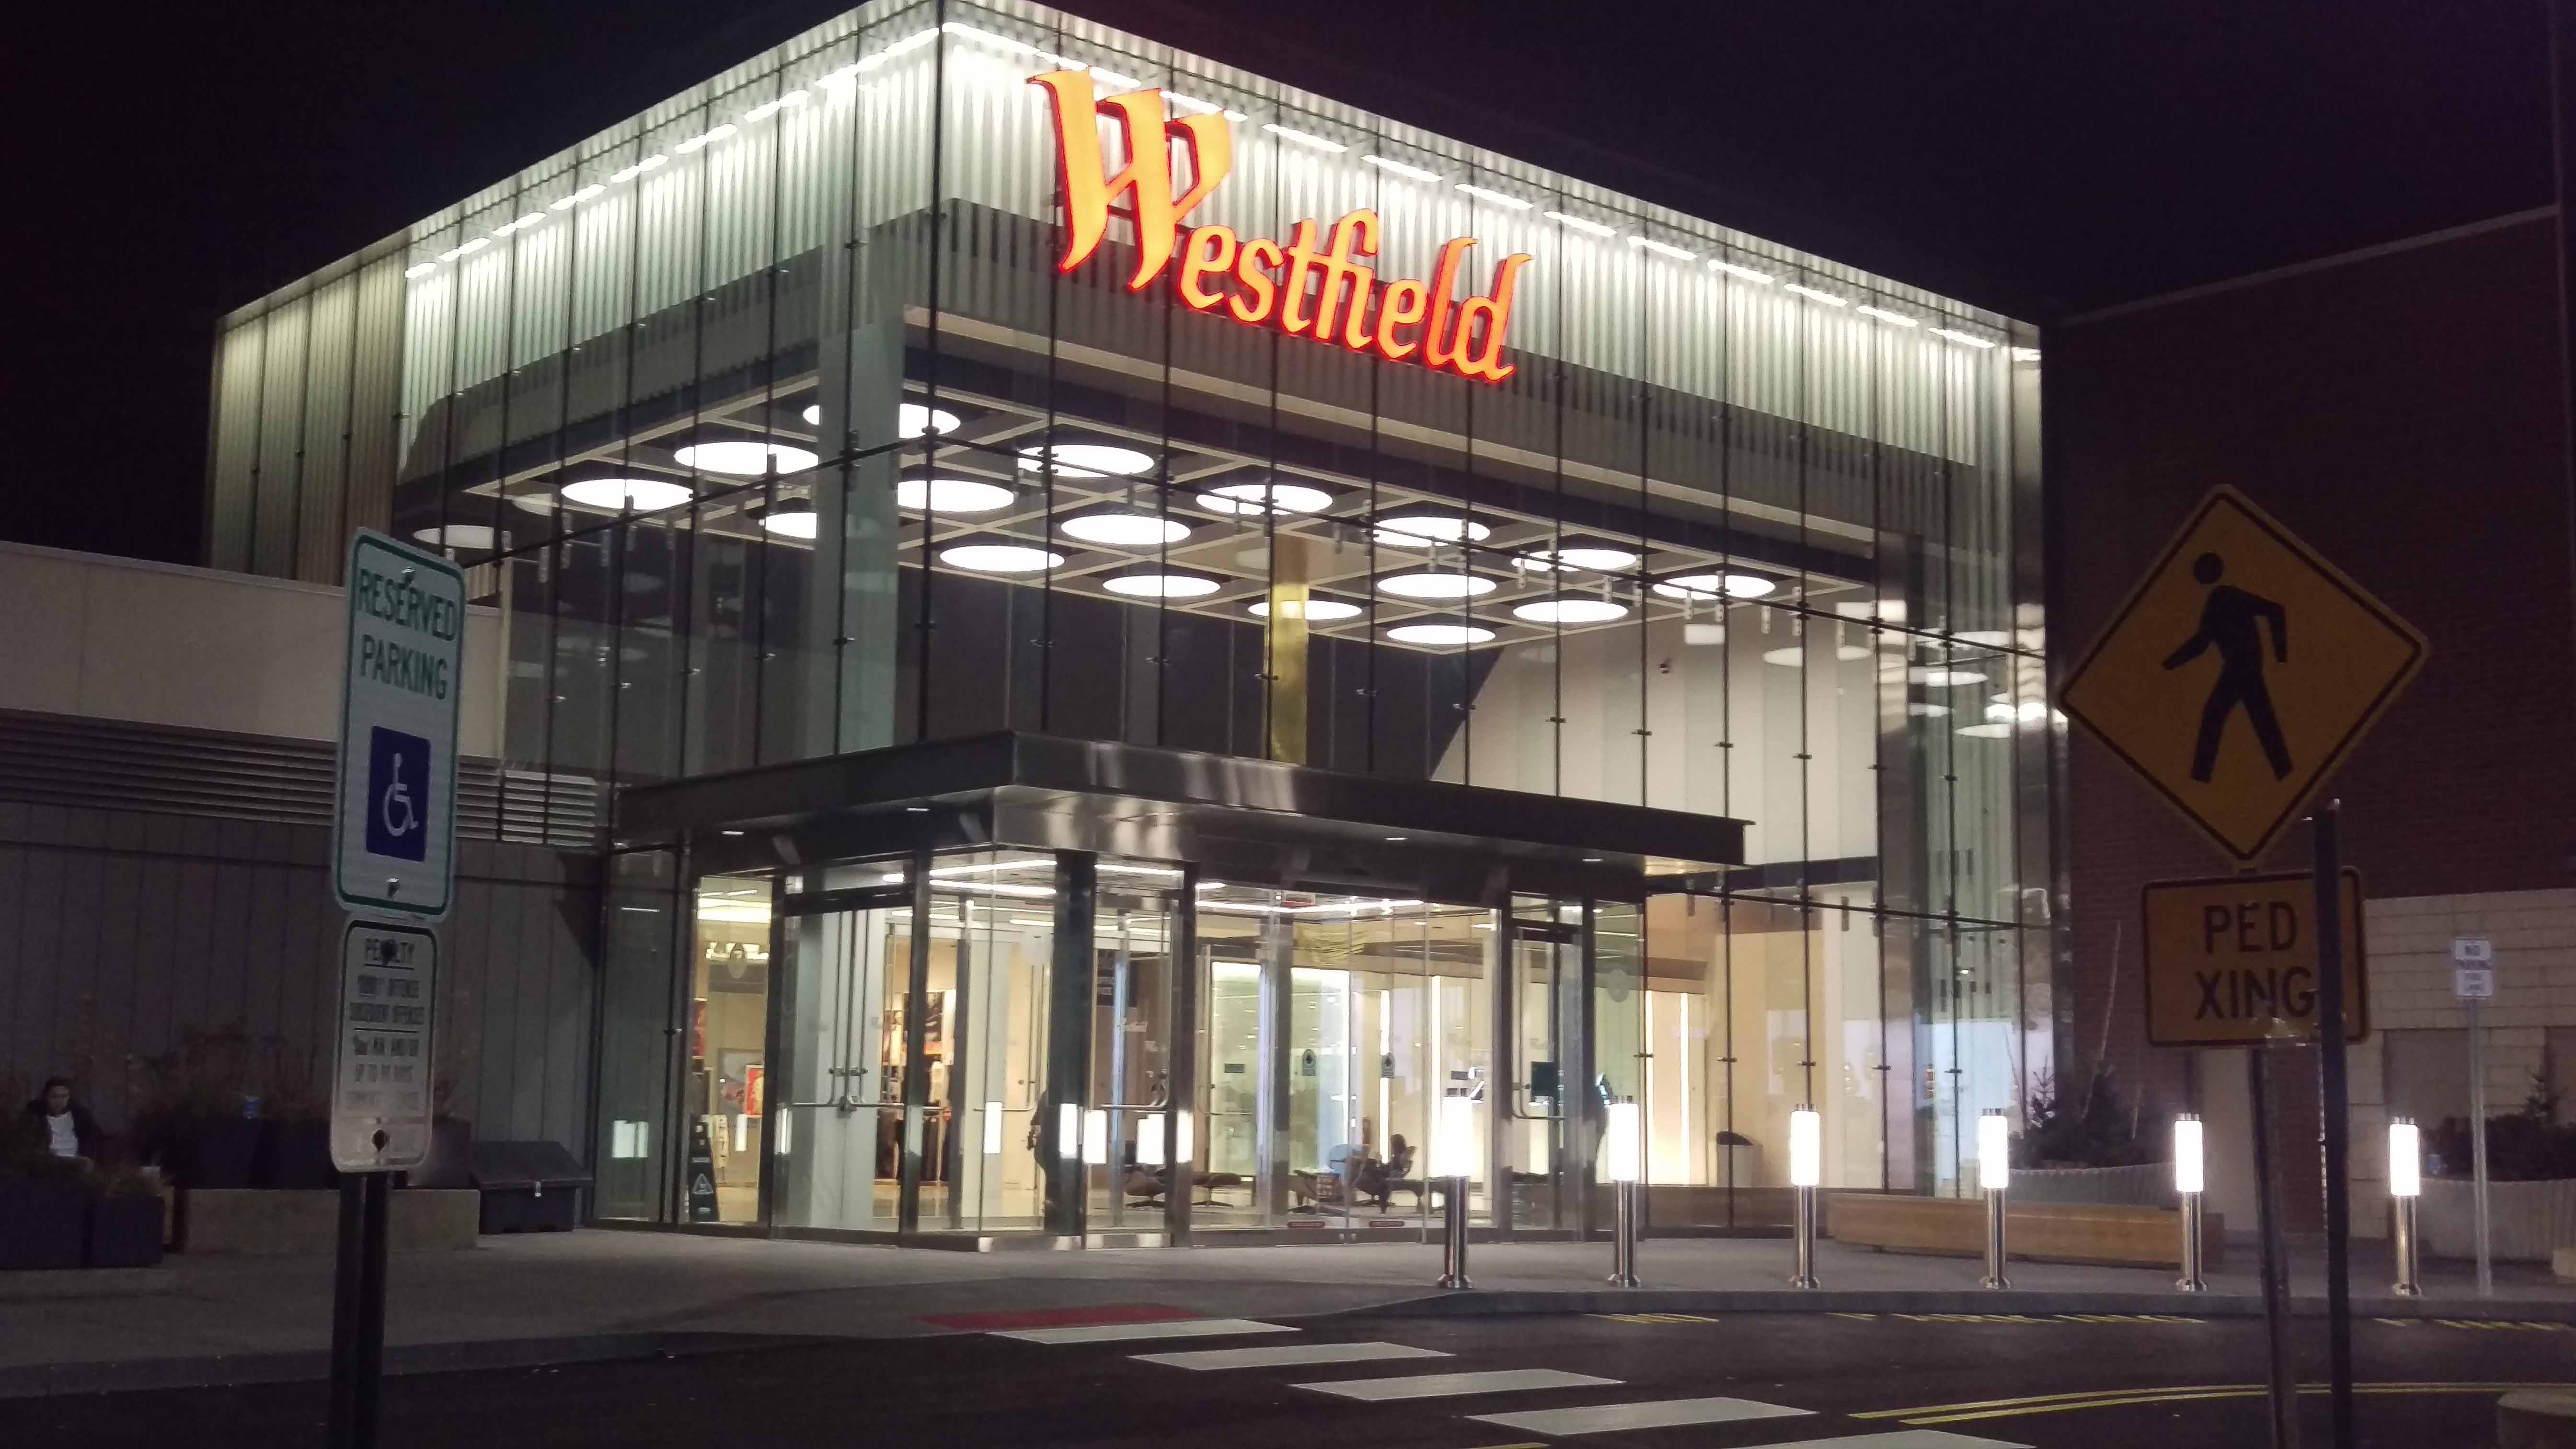 Westfield's New Garden State Plaza Entrance Aims to Impress